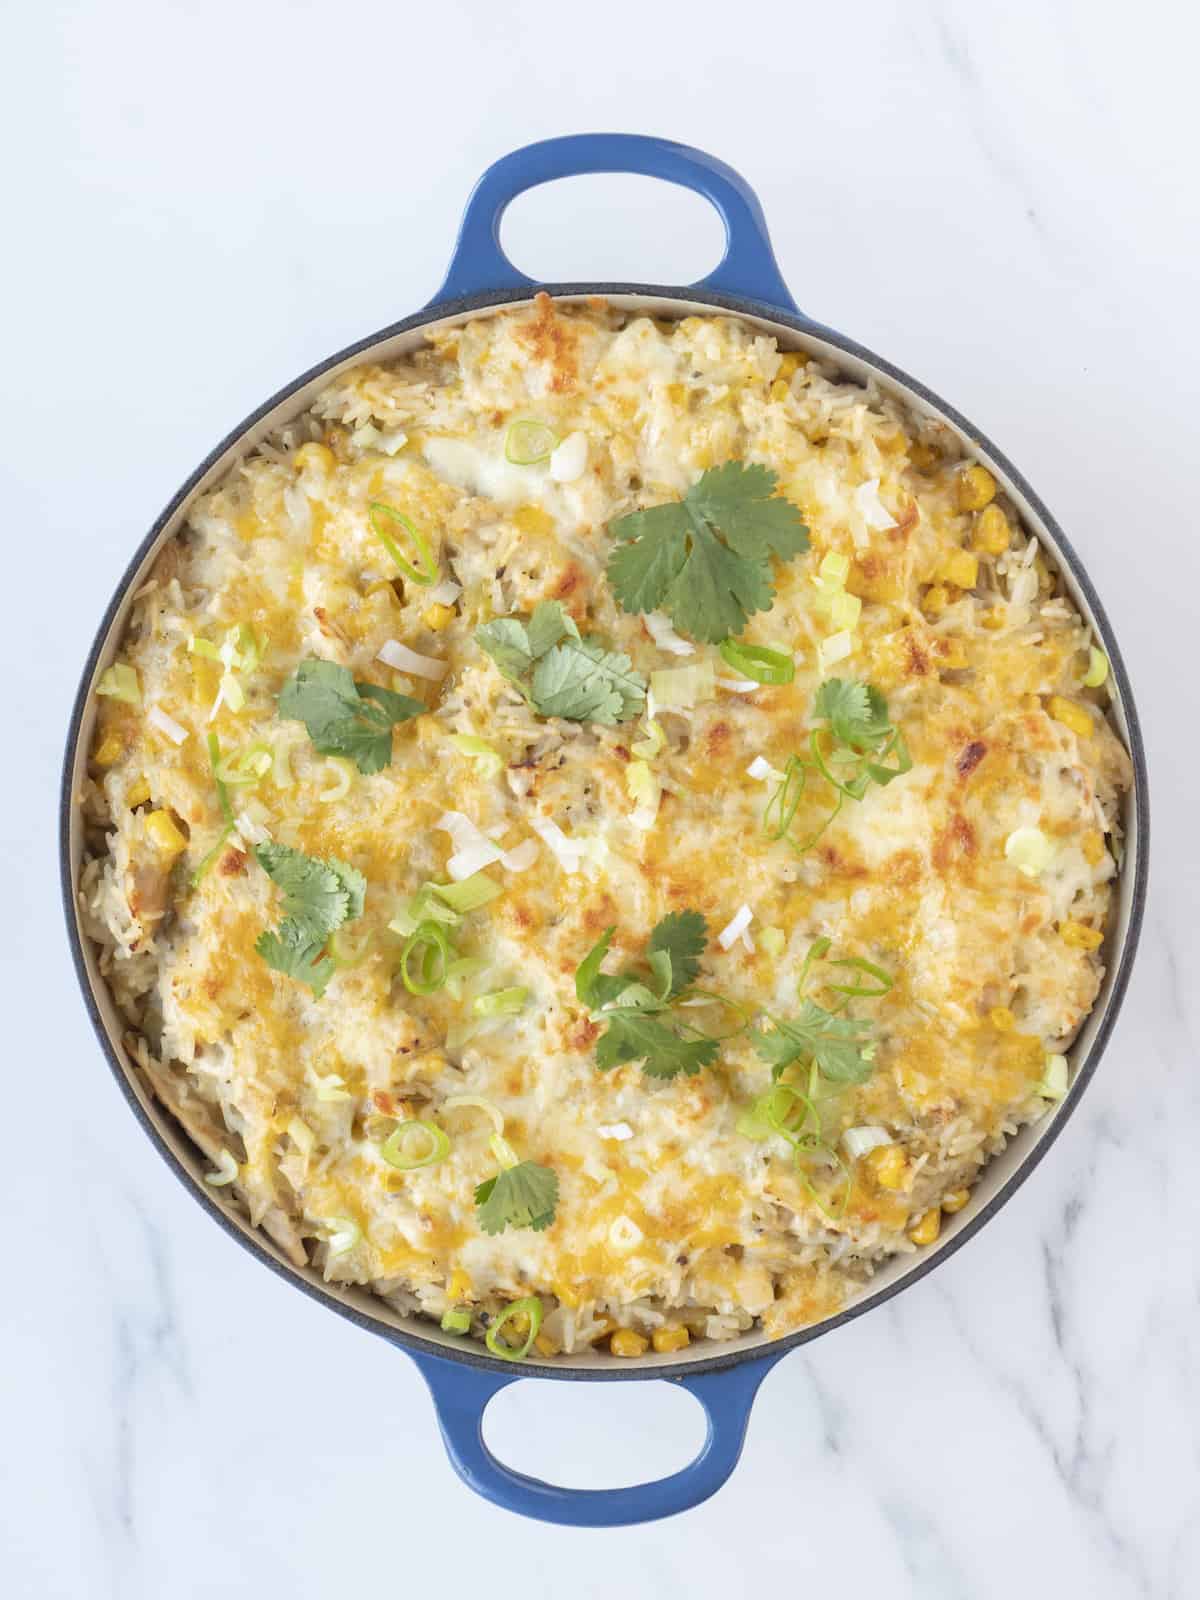 A blue dutch oven with baked cheesy chicken and rice casserole fresh out of the oven garnished with cilantro leaves and chopped scallions.